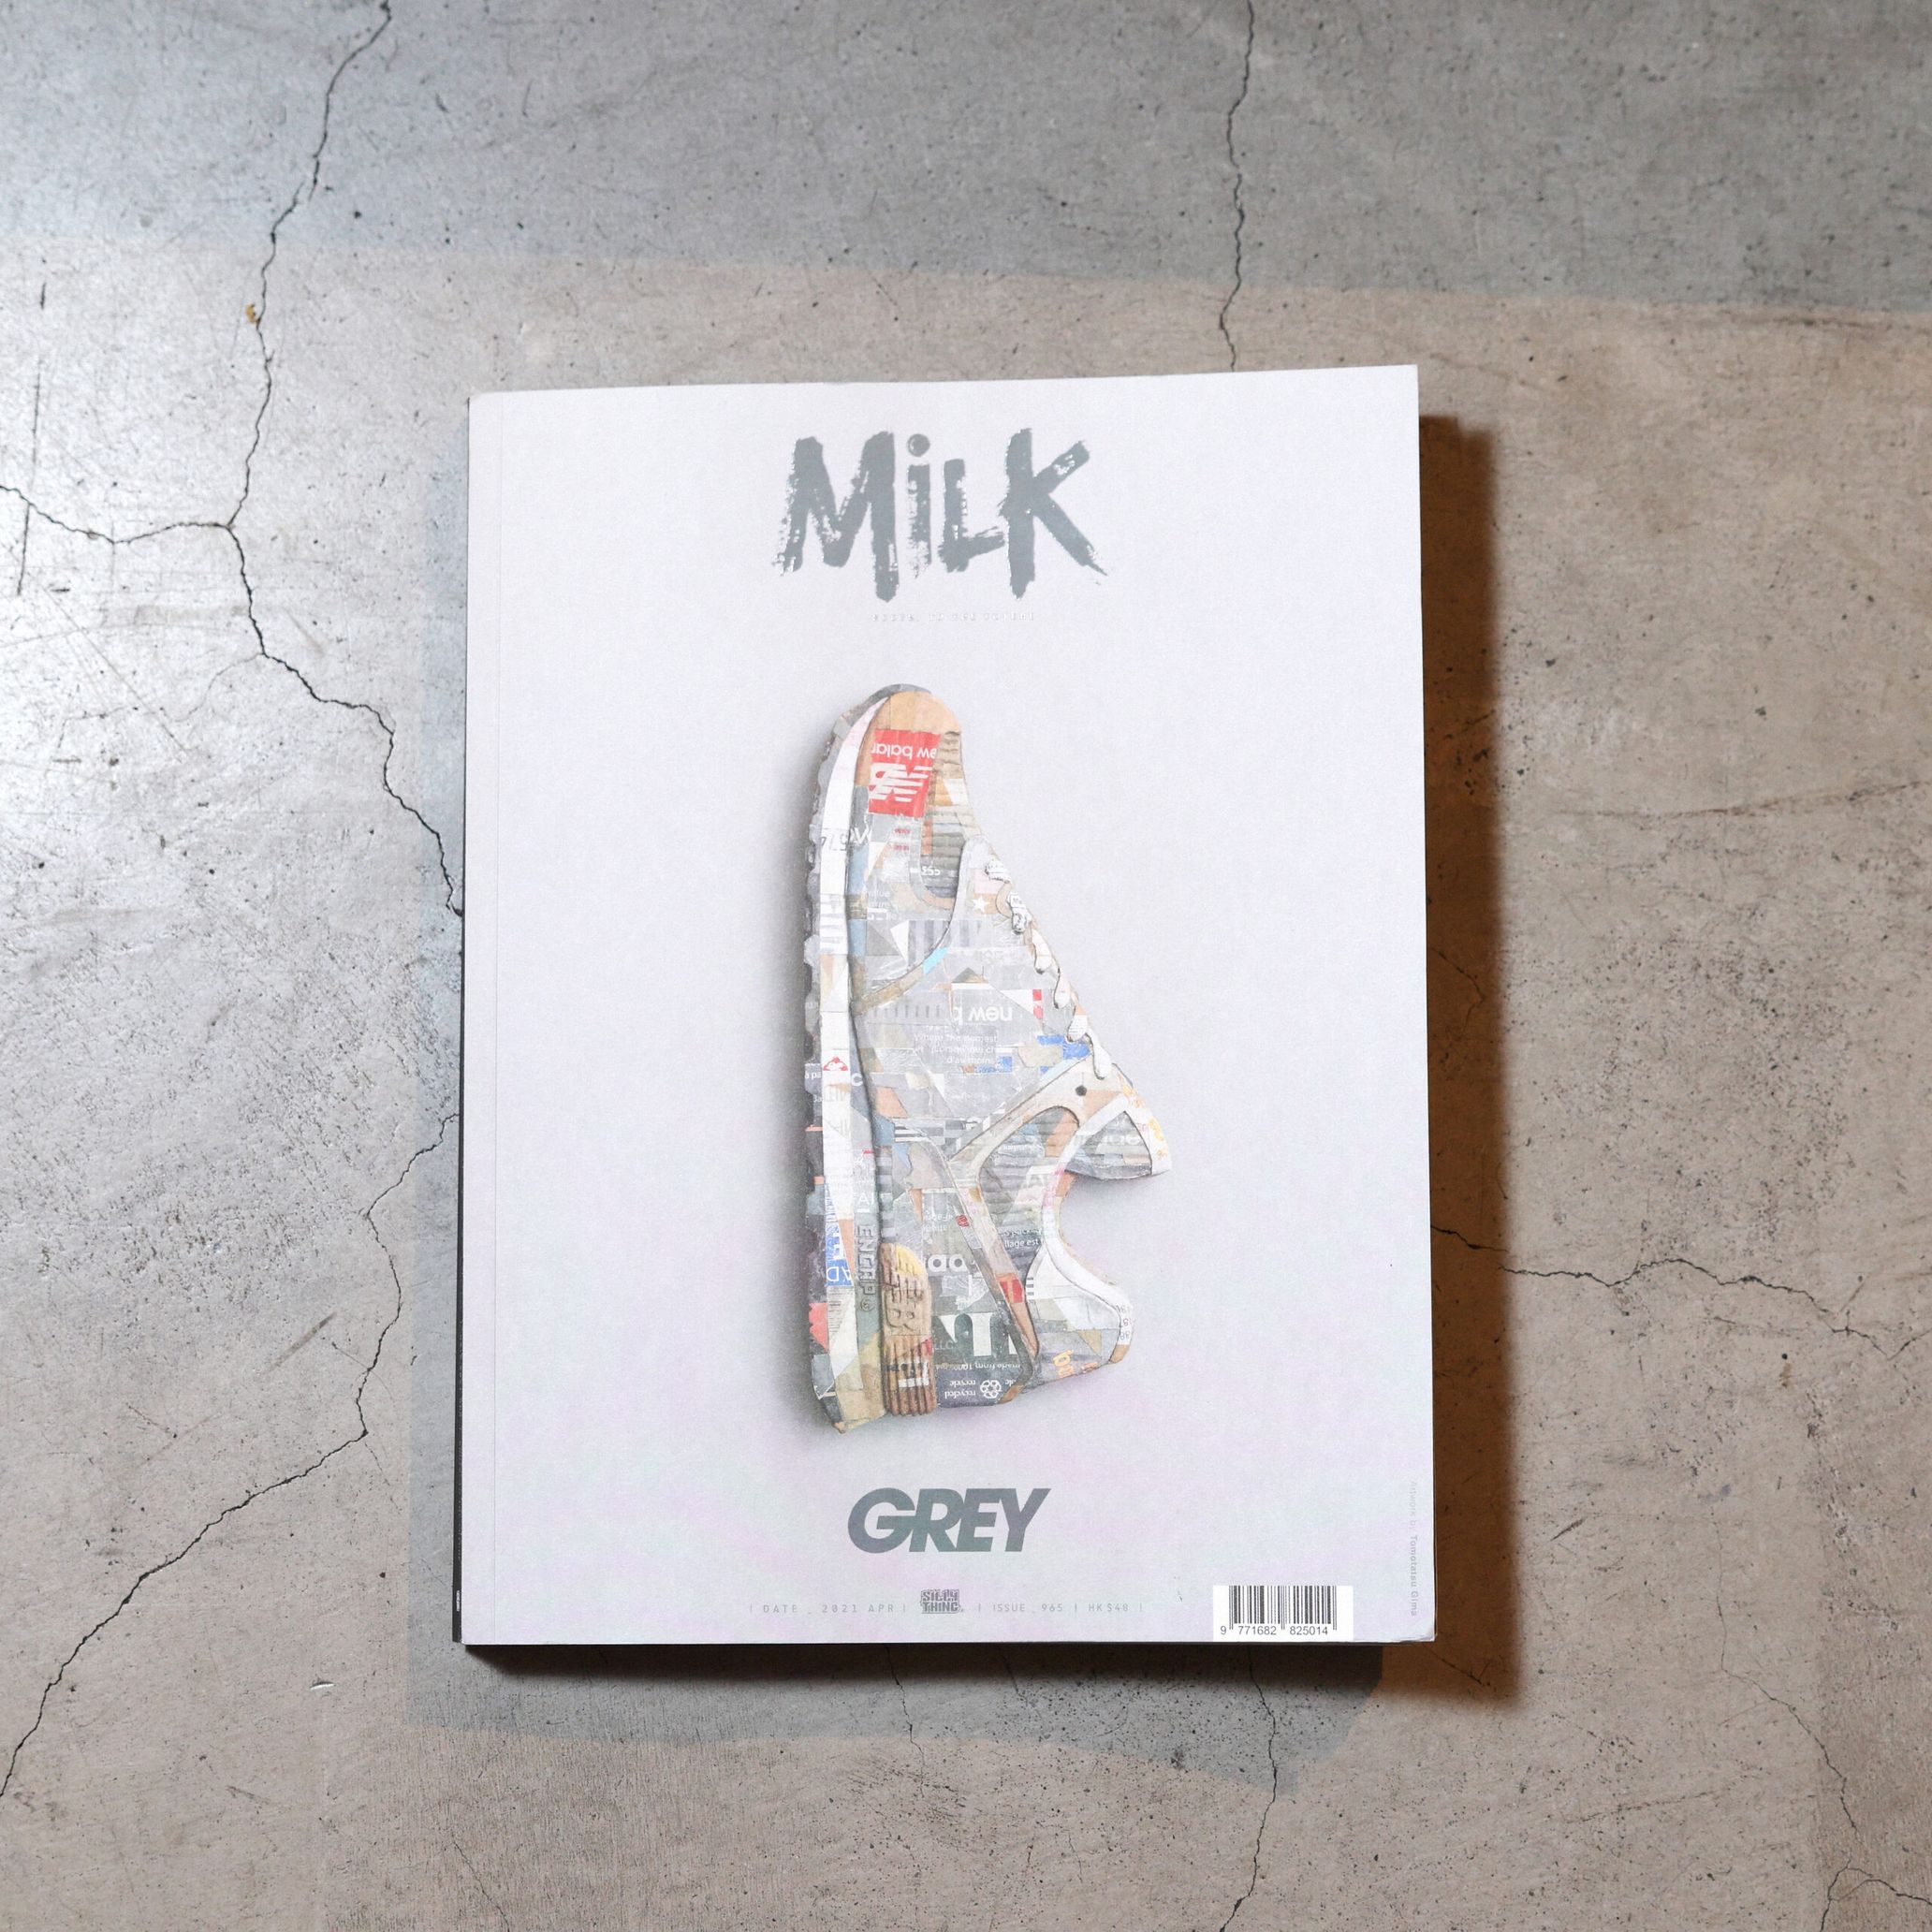 Gima’s work on the cover of the Hong Kong culture magazine MILK MAGAZINE. His interview was also published in the magazine